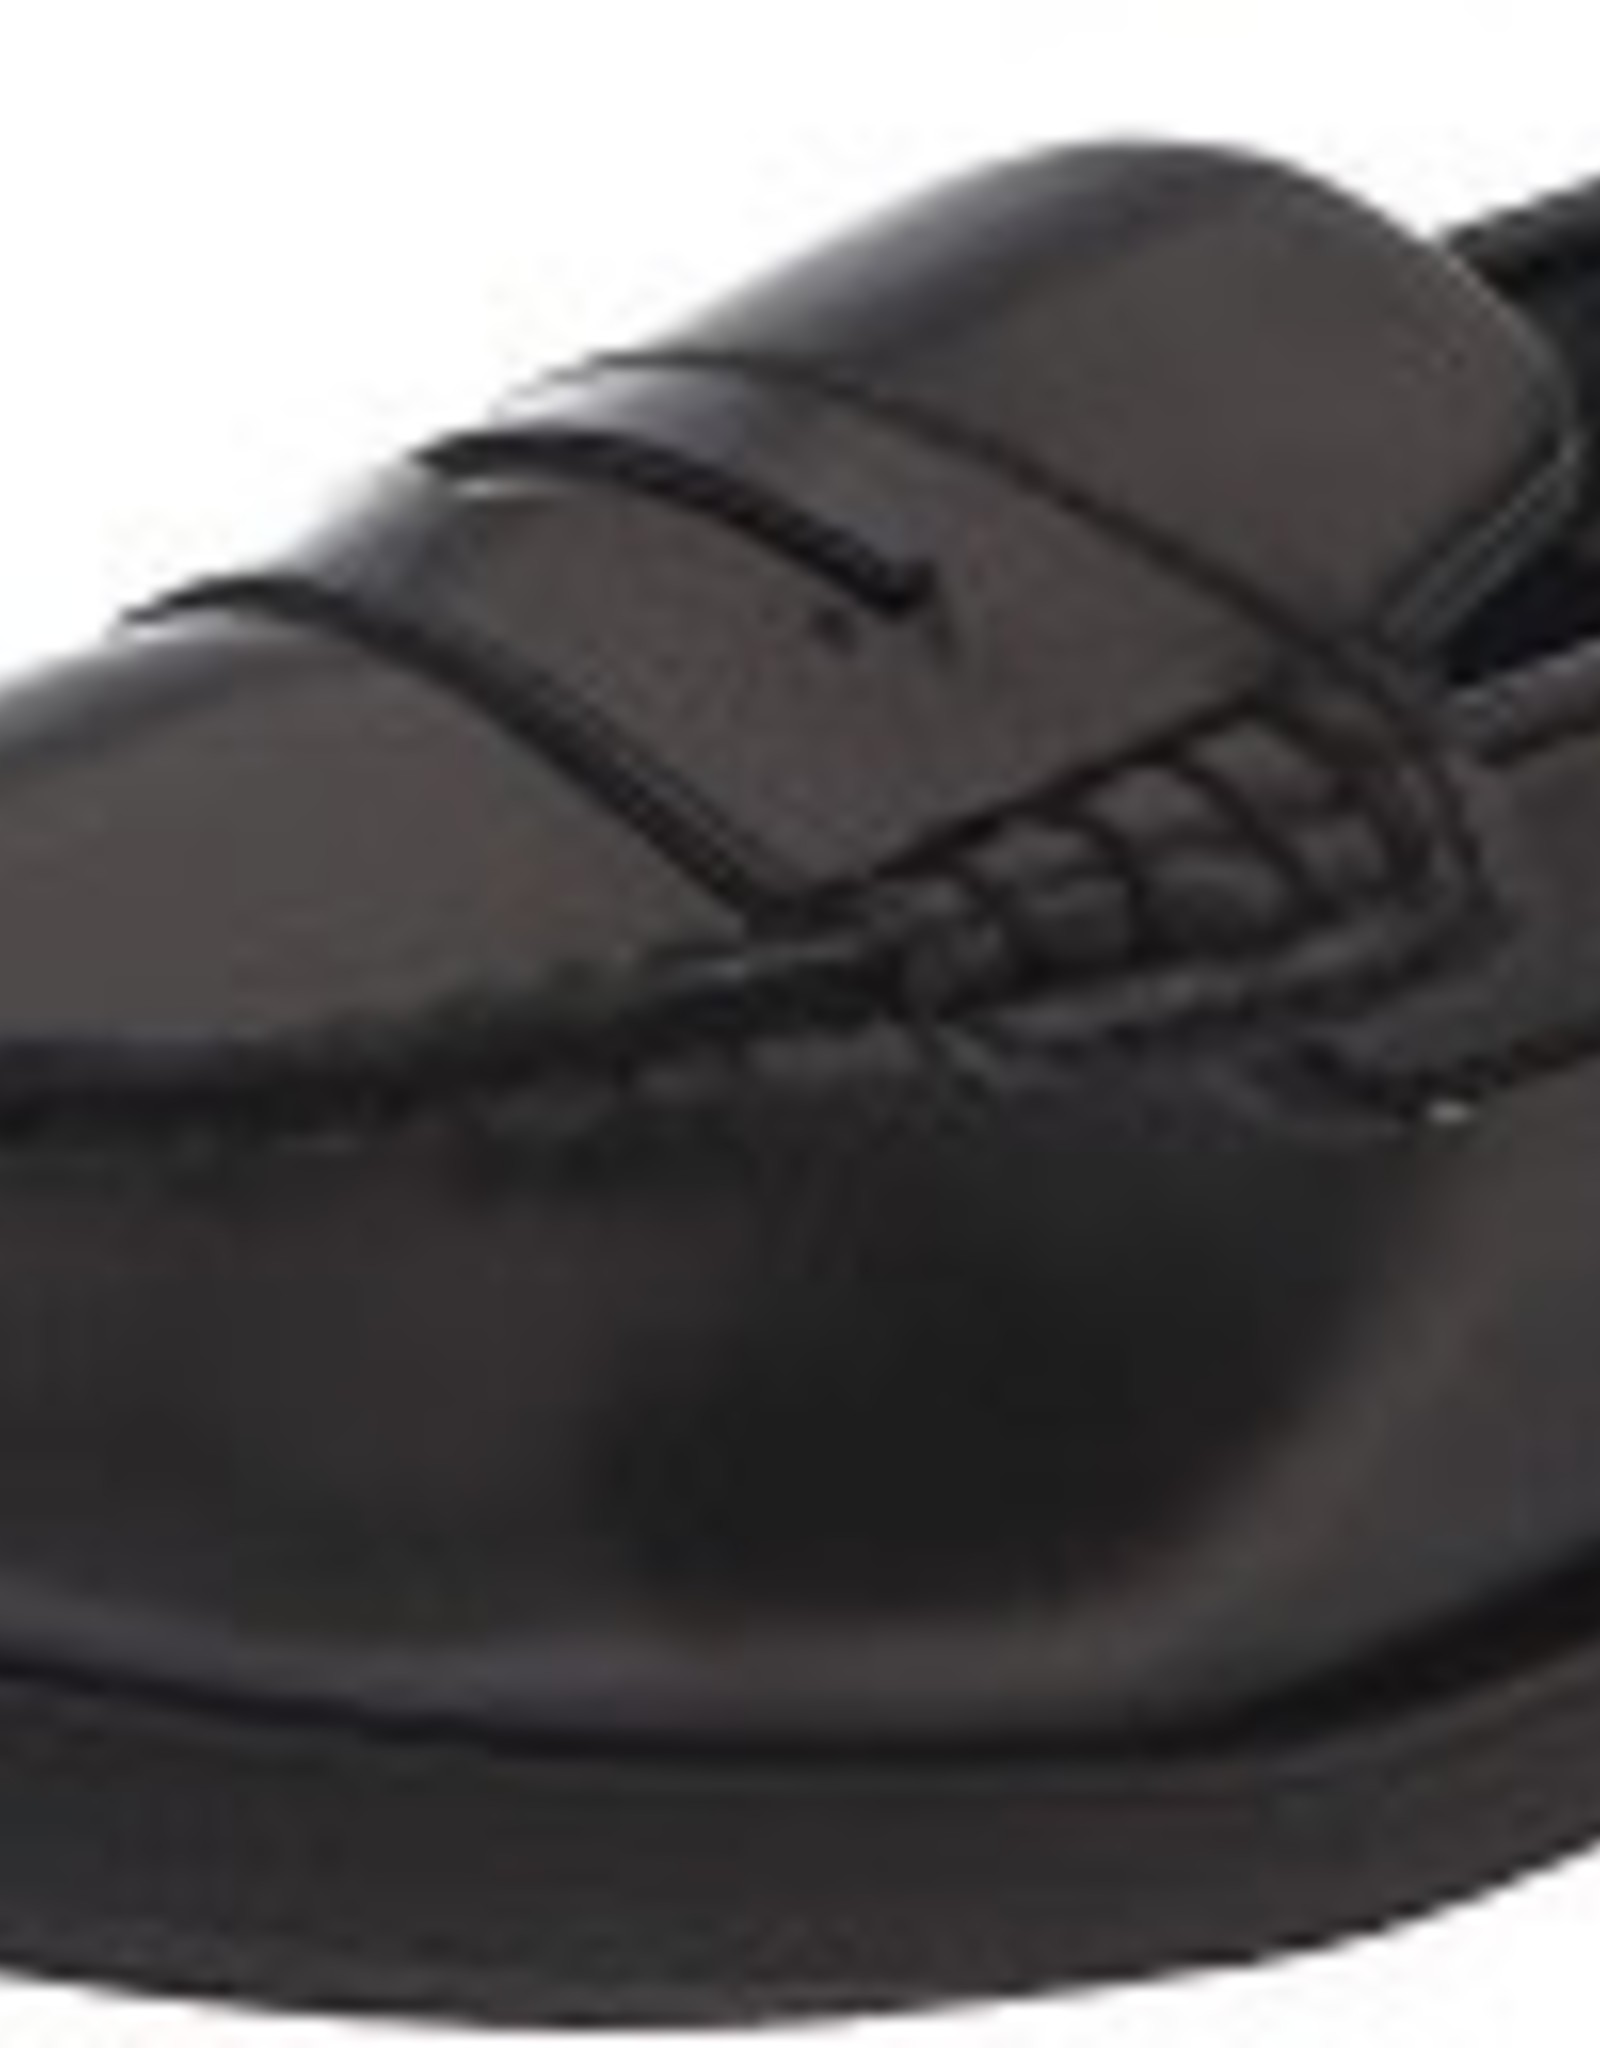 Sperry Penny Loafer